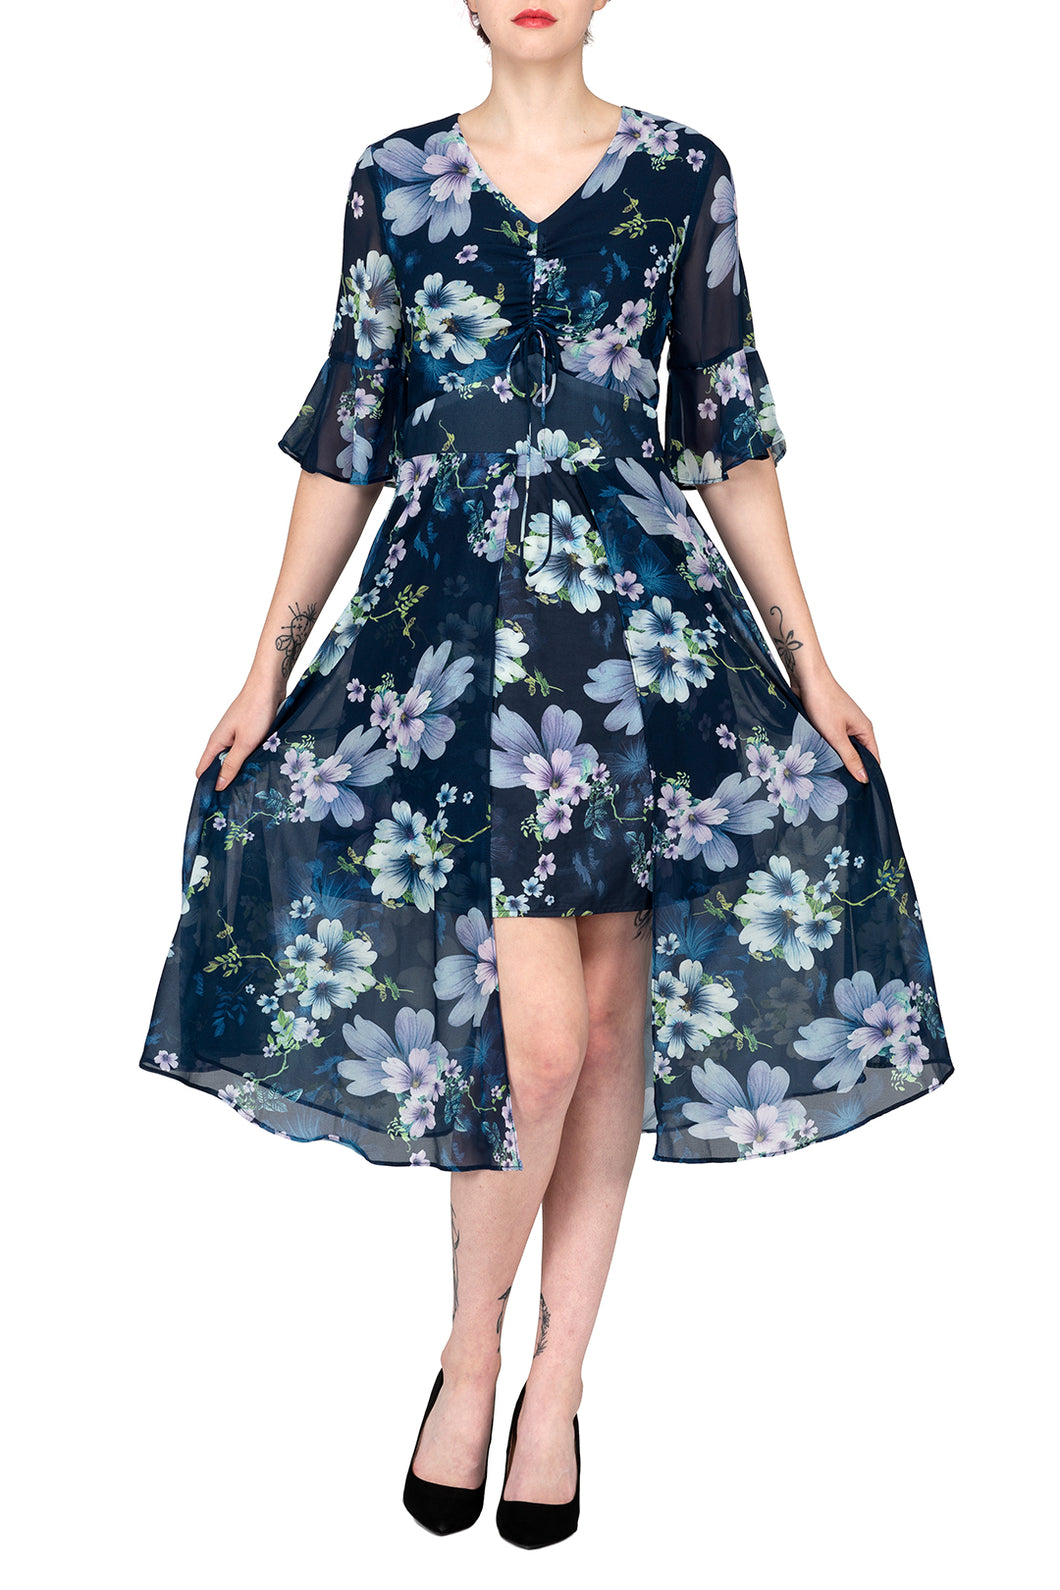 TWO PEARS-Flowy Print Dress with Drawstring